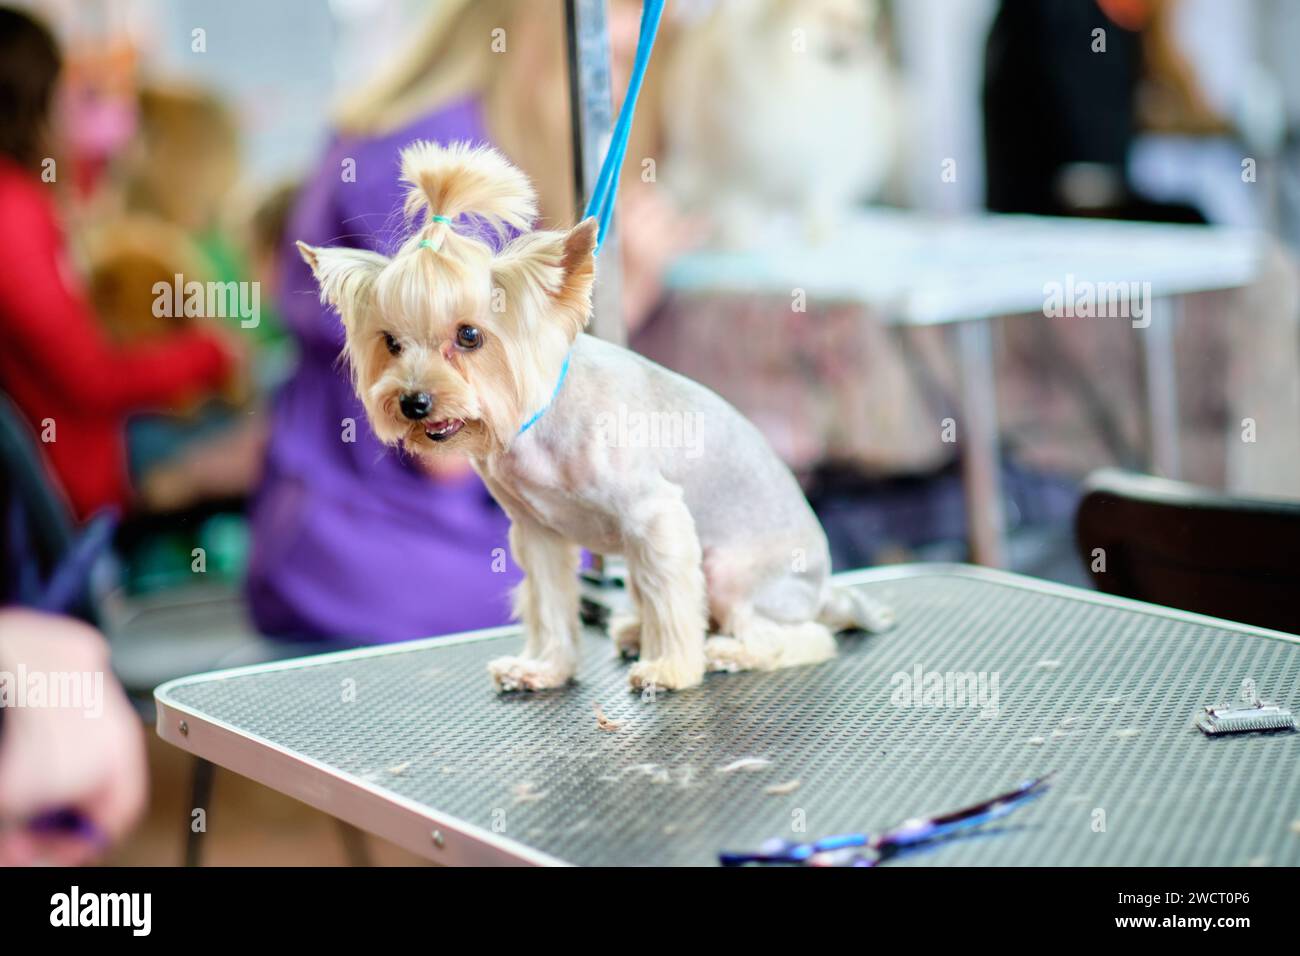 A Yorkshire Terrier dog on a grooming table after a haircut in the salon Stock Photo